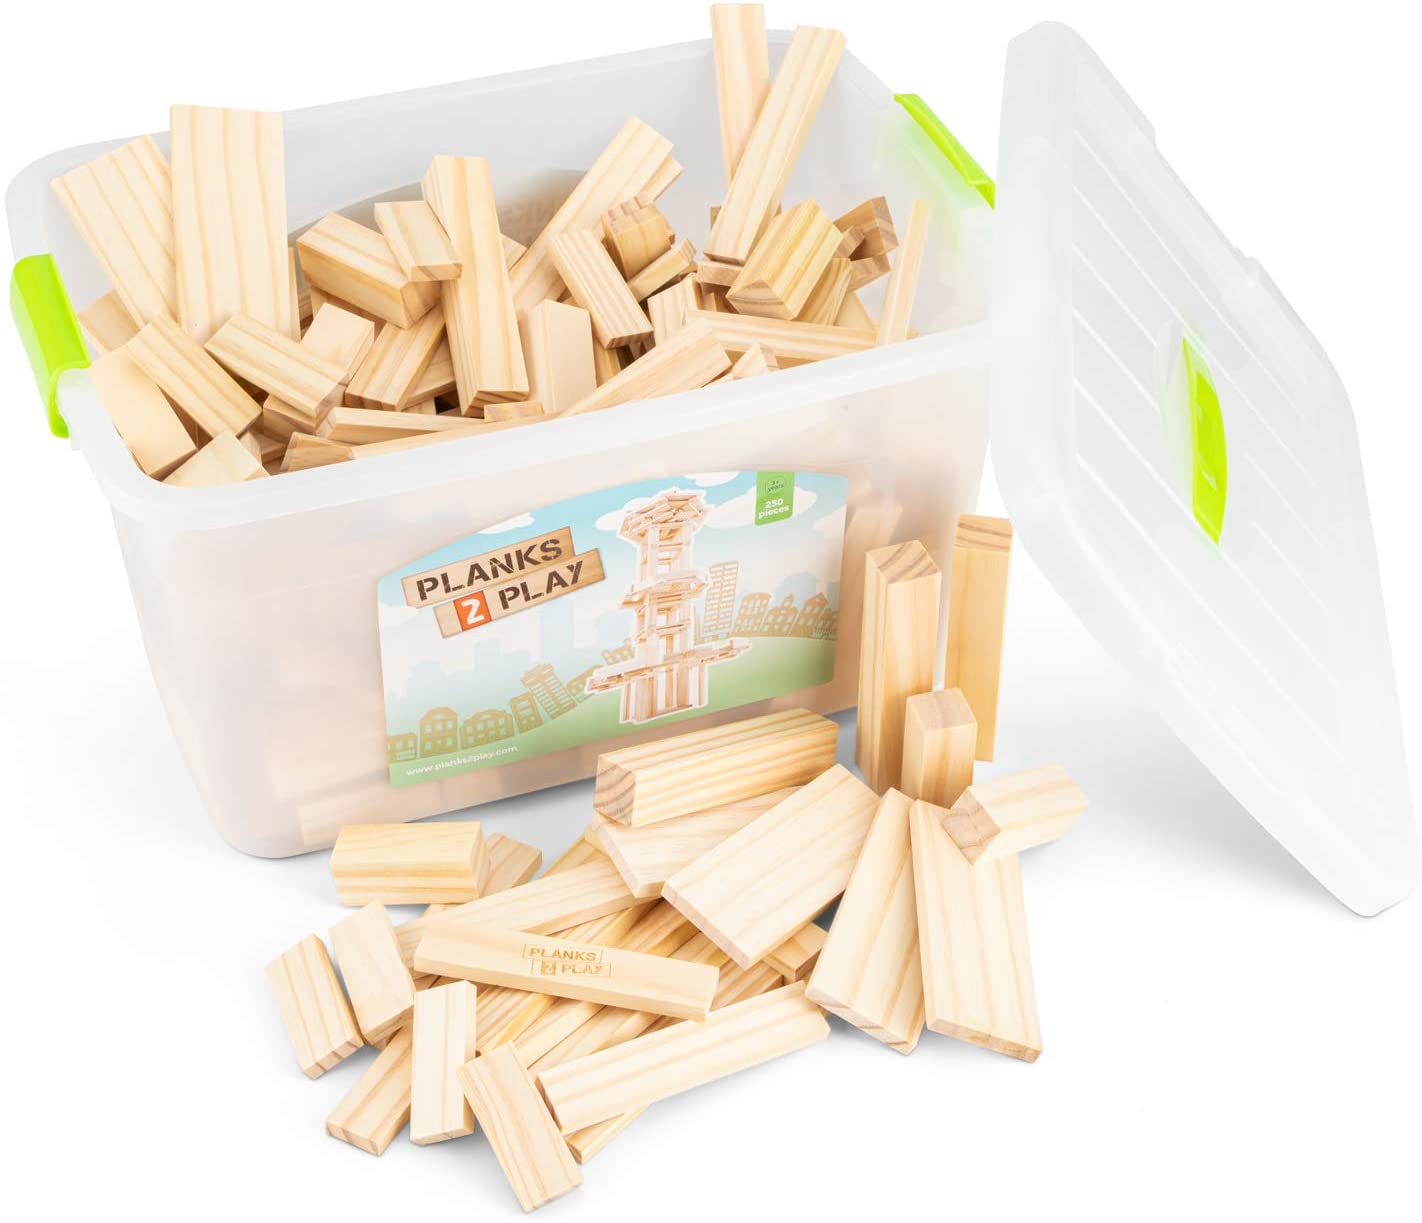 Planks 2 Play - Mix Box - Pack Of 250